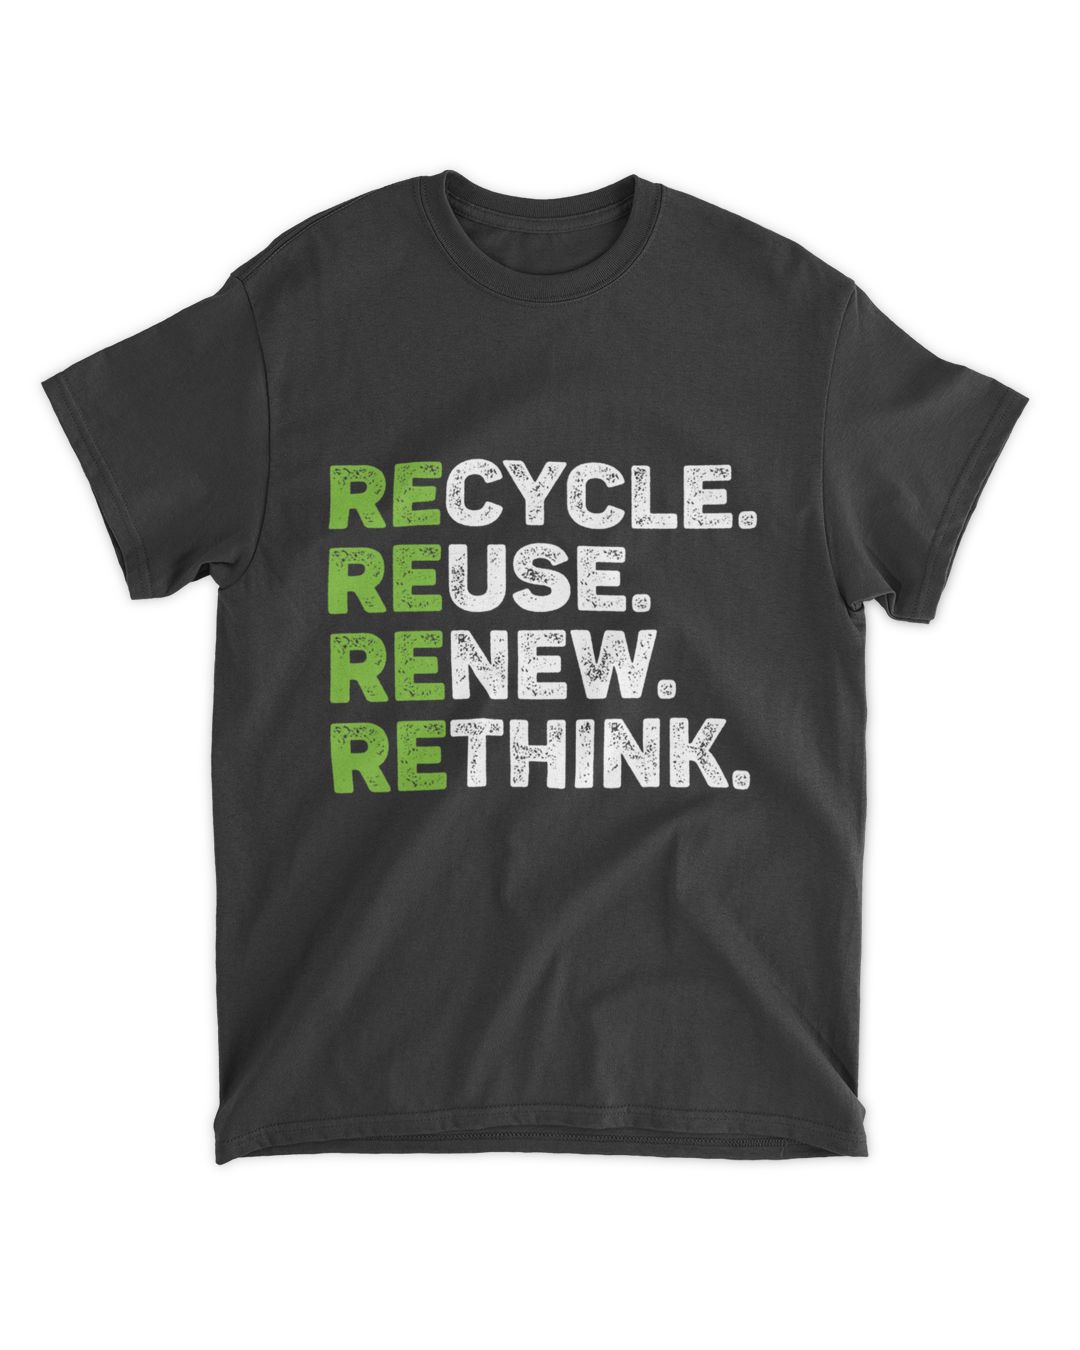 Recycle Reuse Renew Rethink Earth Day Environmental Activism T-Shirt ...